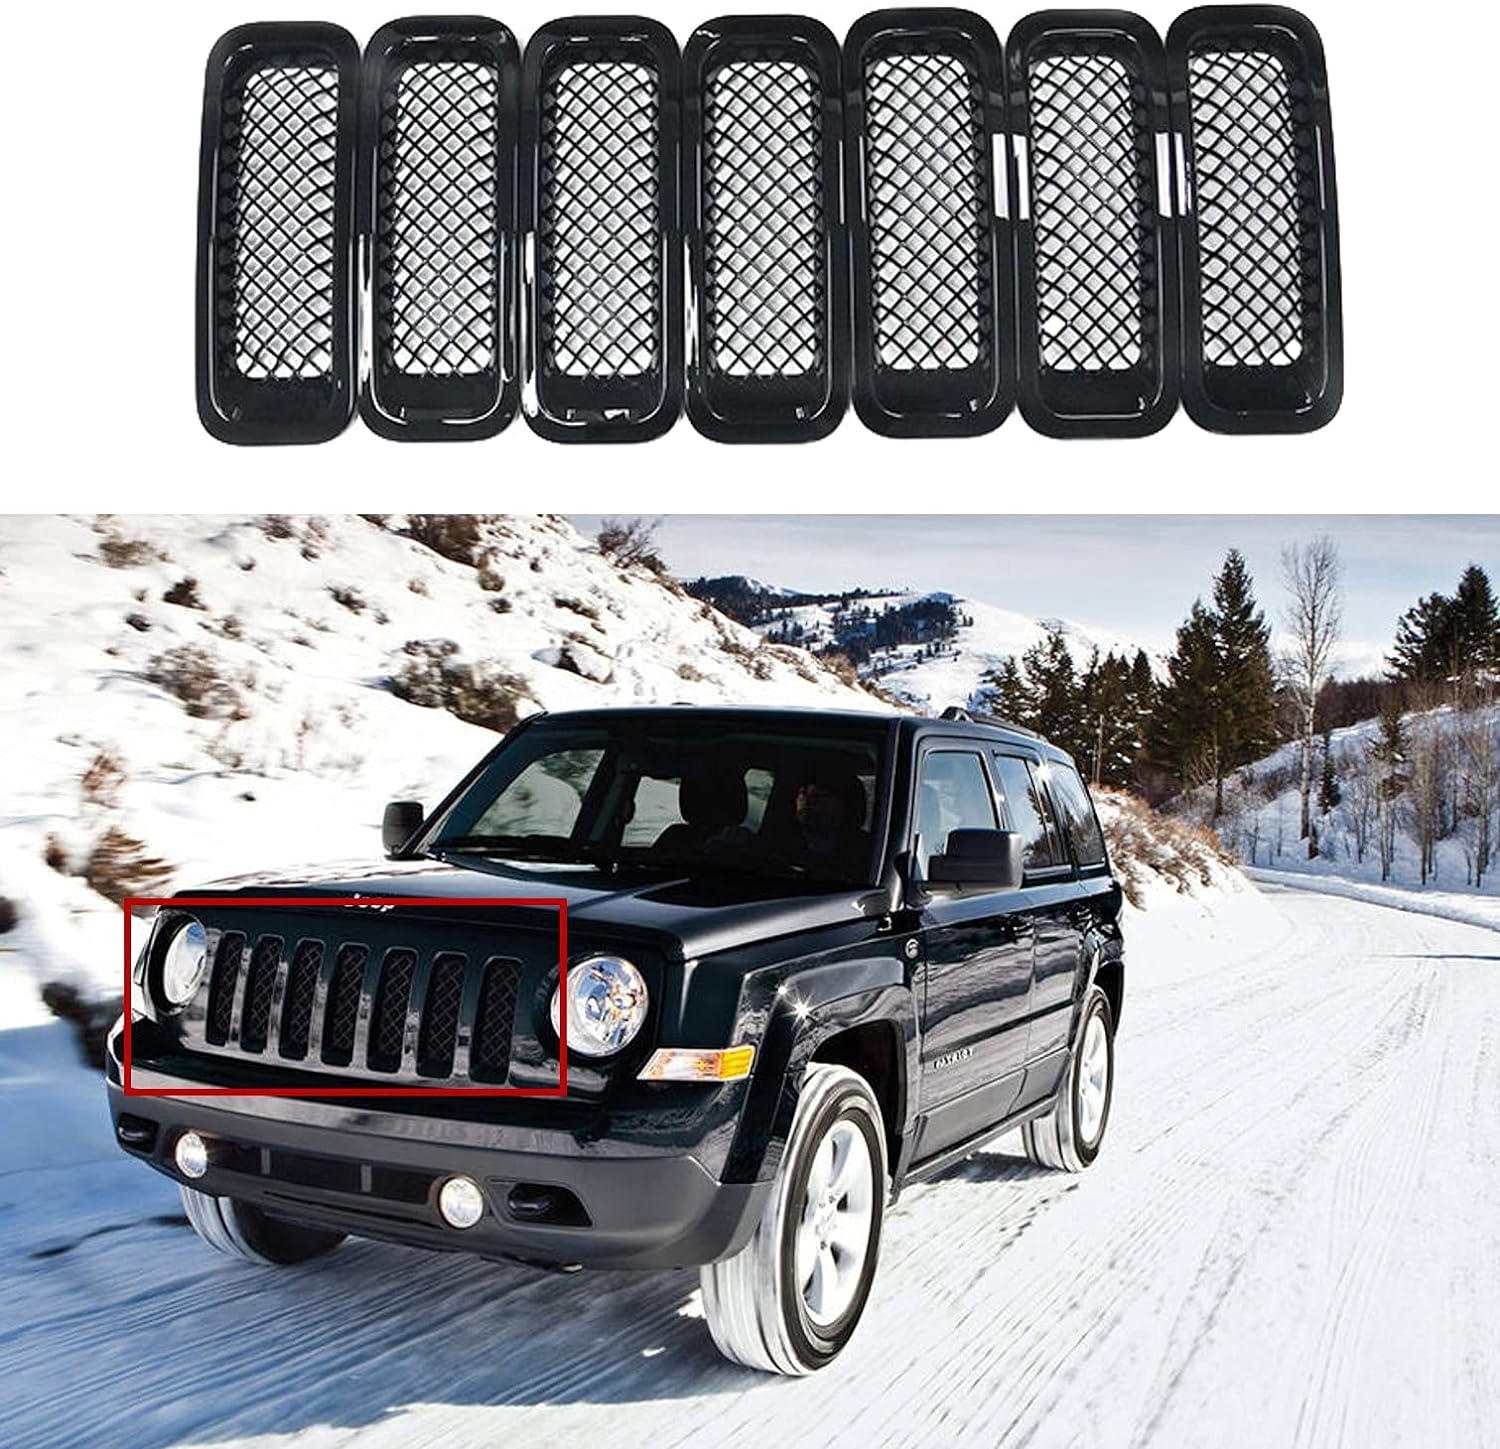 AVOMARR AVOMAR Front Grille Grill Mesh Grille Insert Kit + Angry Bird Style Headlight Lamp Cover Trim Compatible for Jeep Patriot 2011-